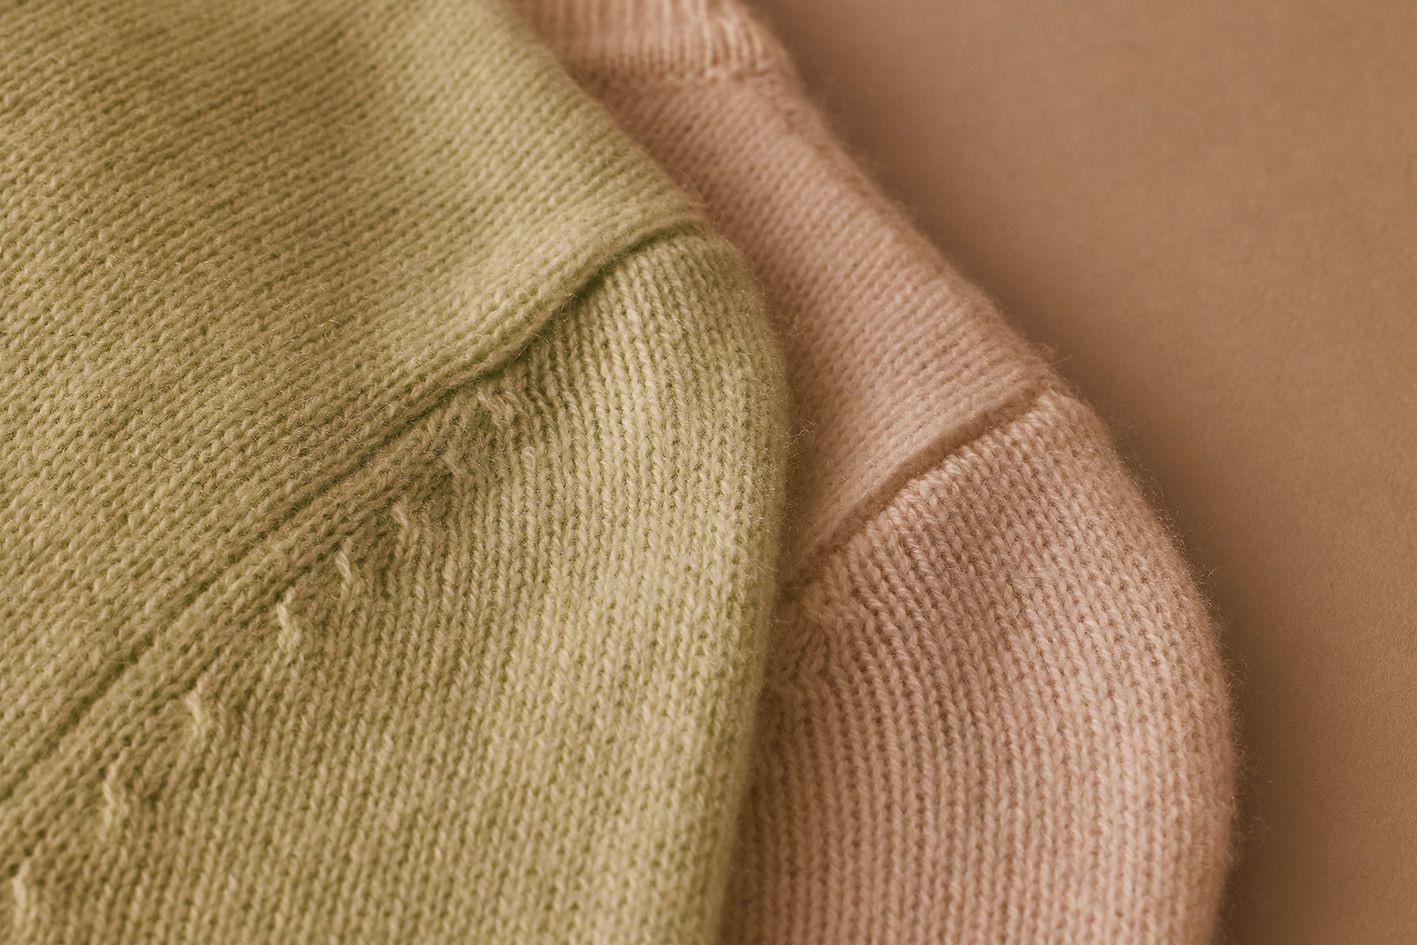 Scanlan Theodore cashmere with close detailed view of fabrics texture.